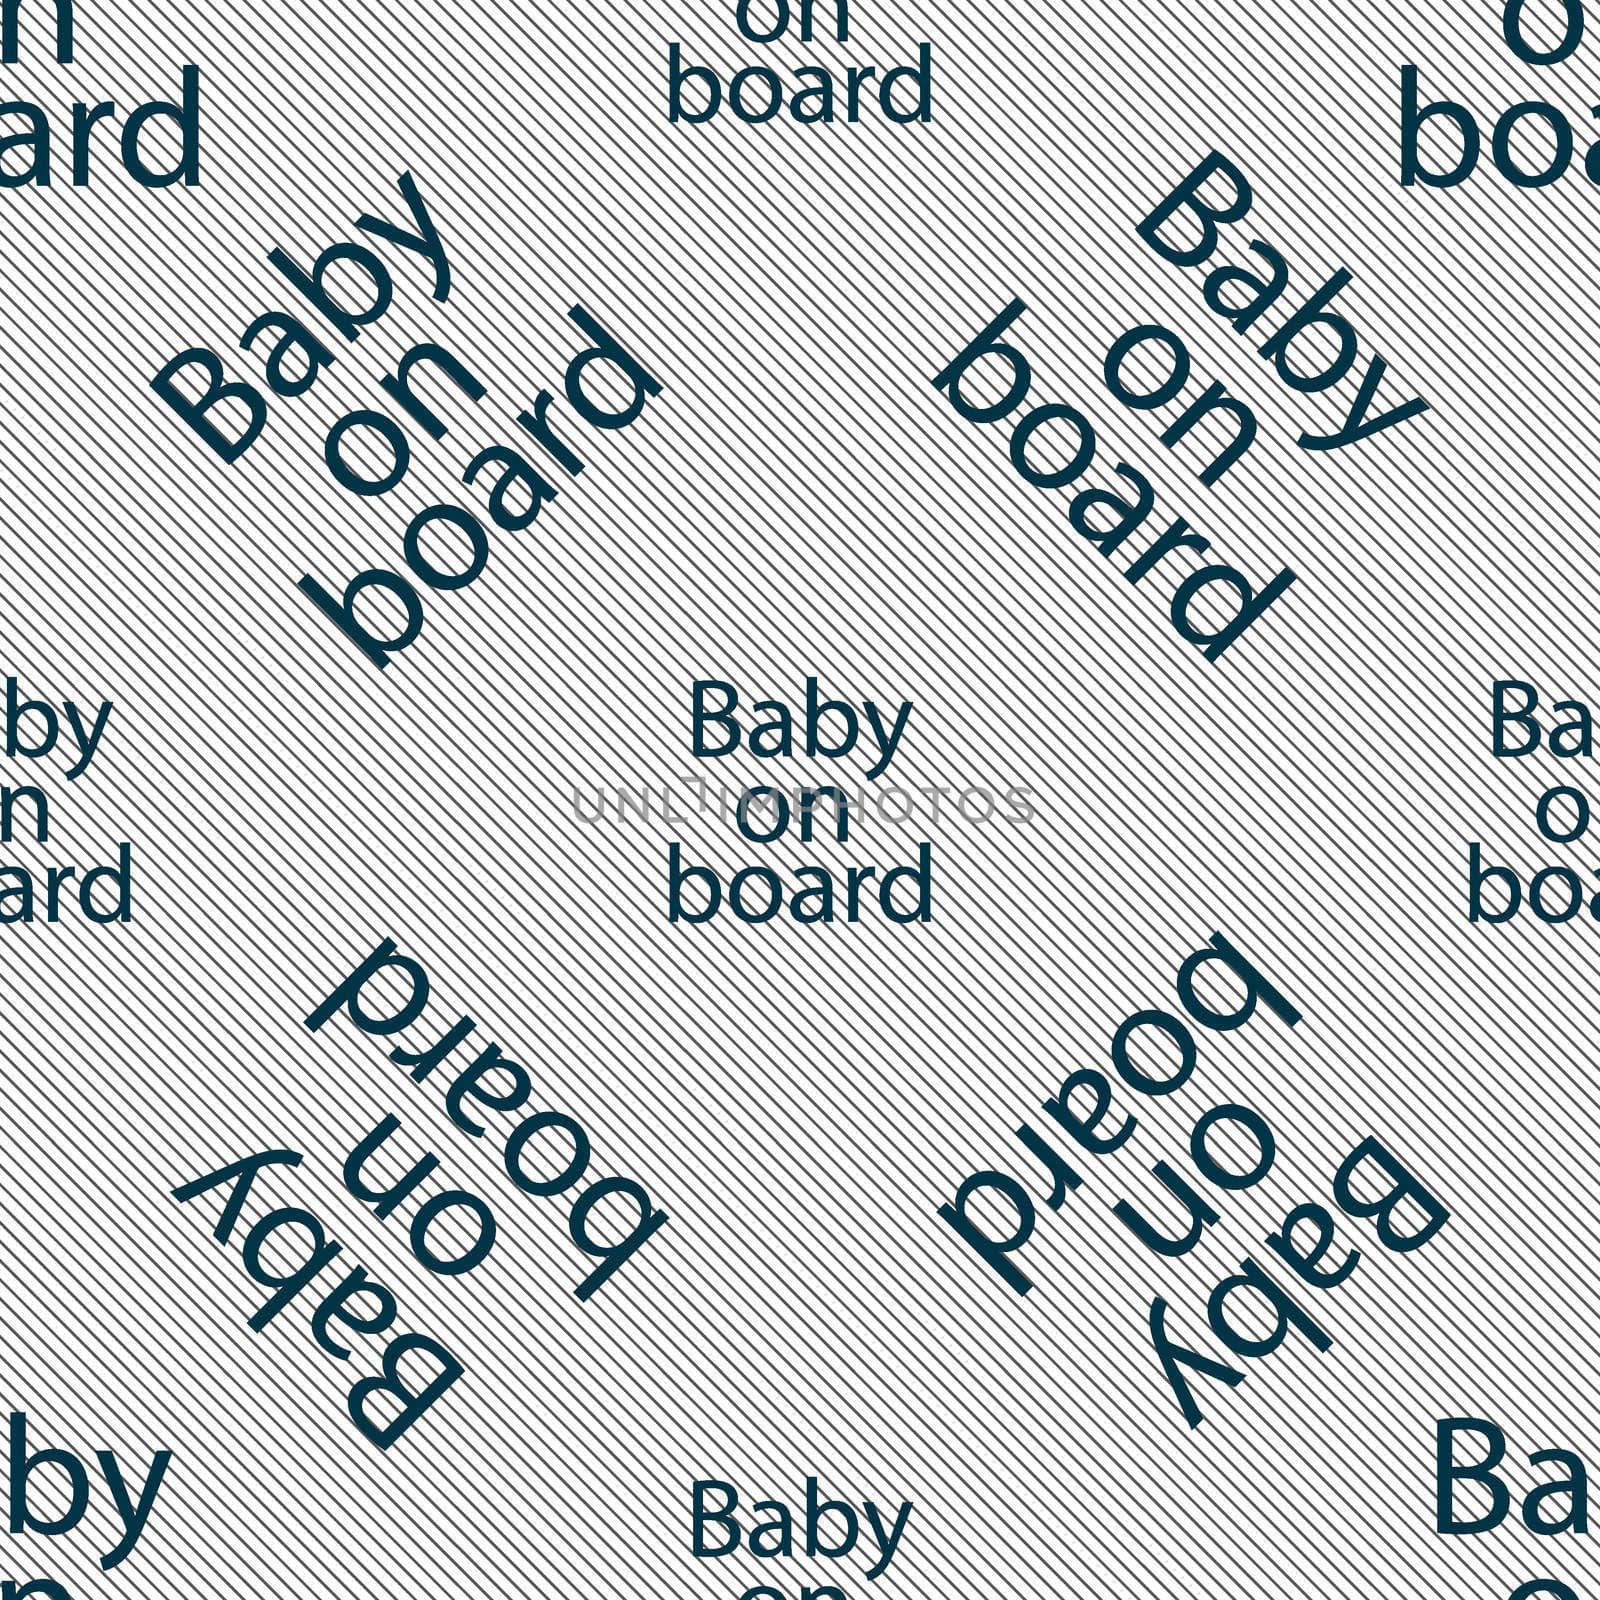 Baby on board sign icon. Infant in car caution symbol. Seamless pattern with geometric texture.  by serhii_lohvyniuk